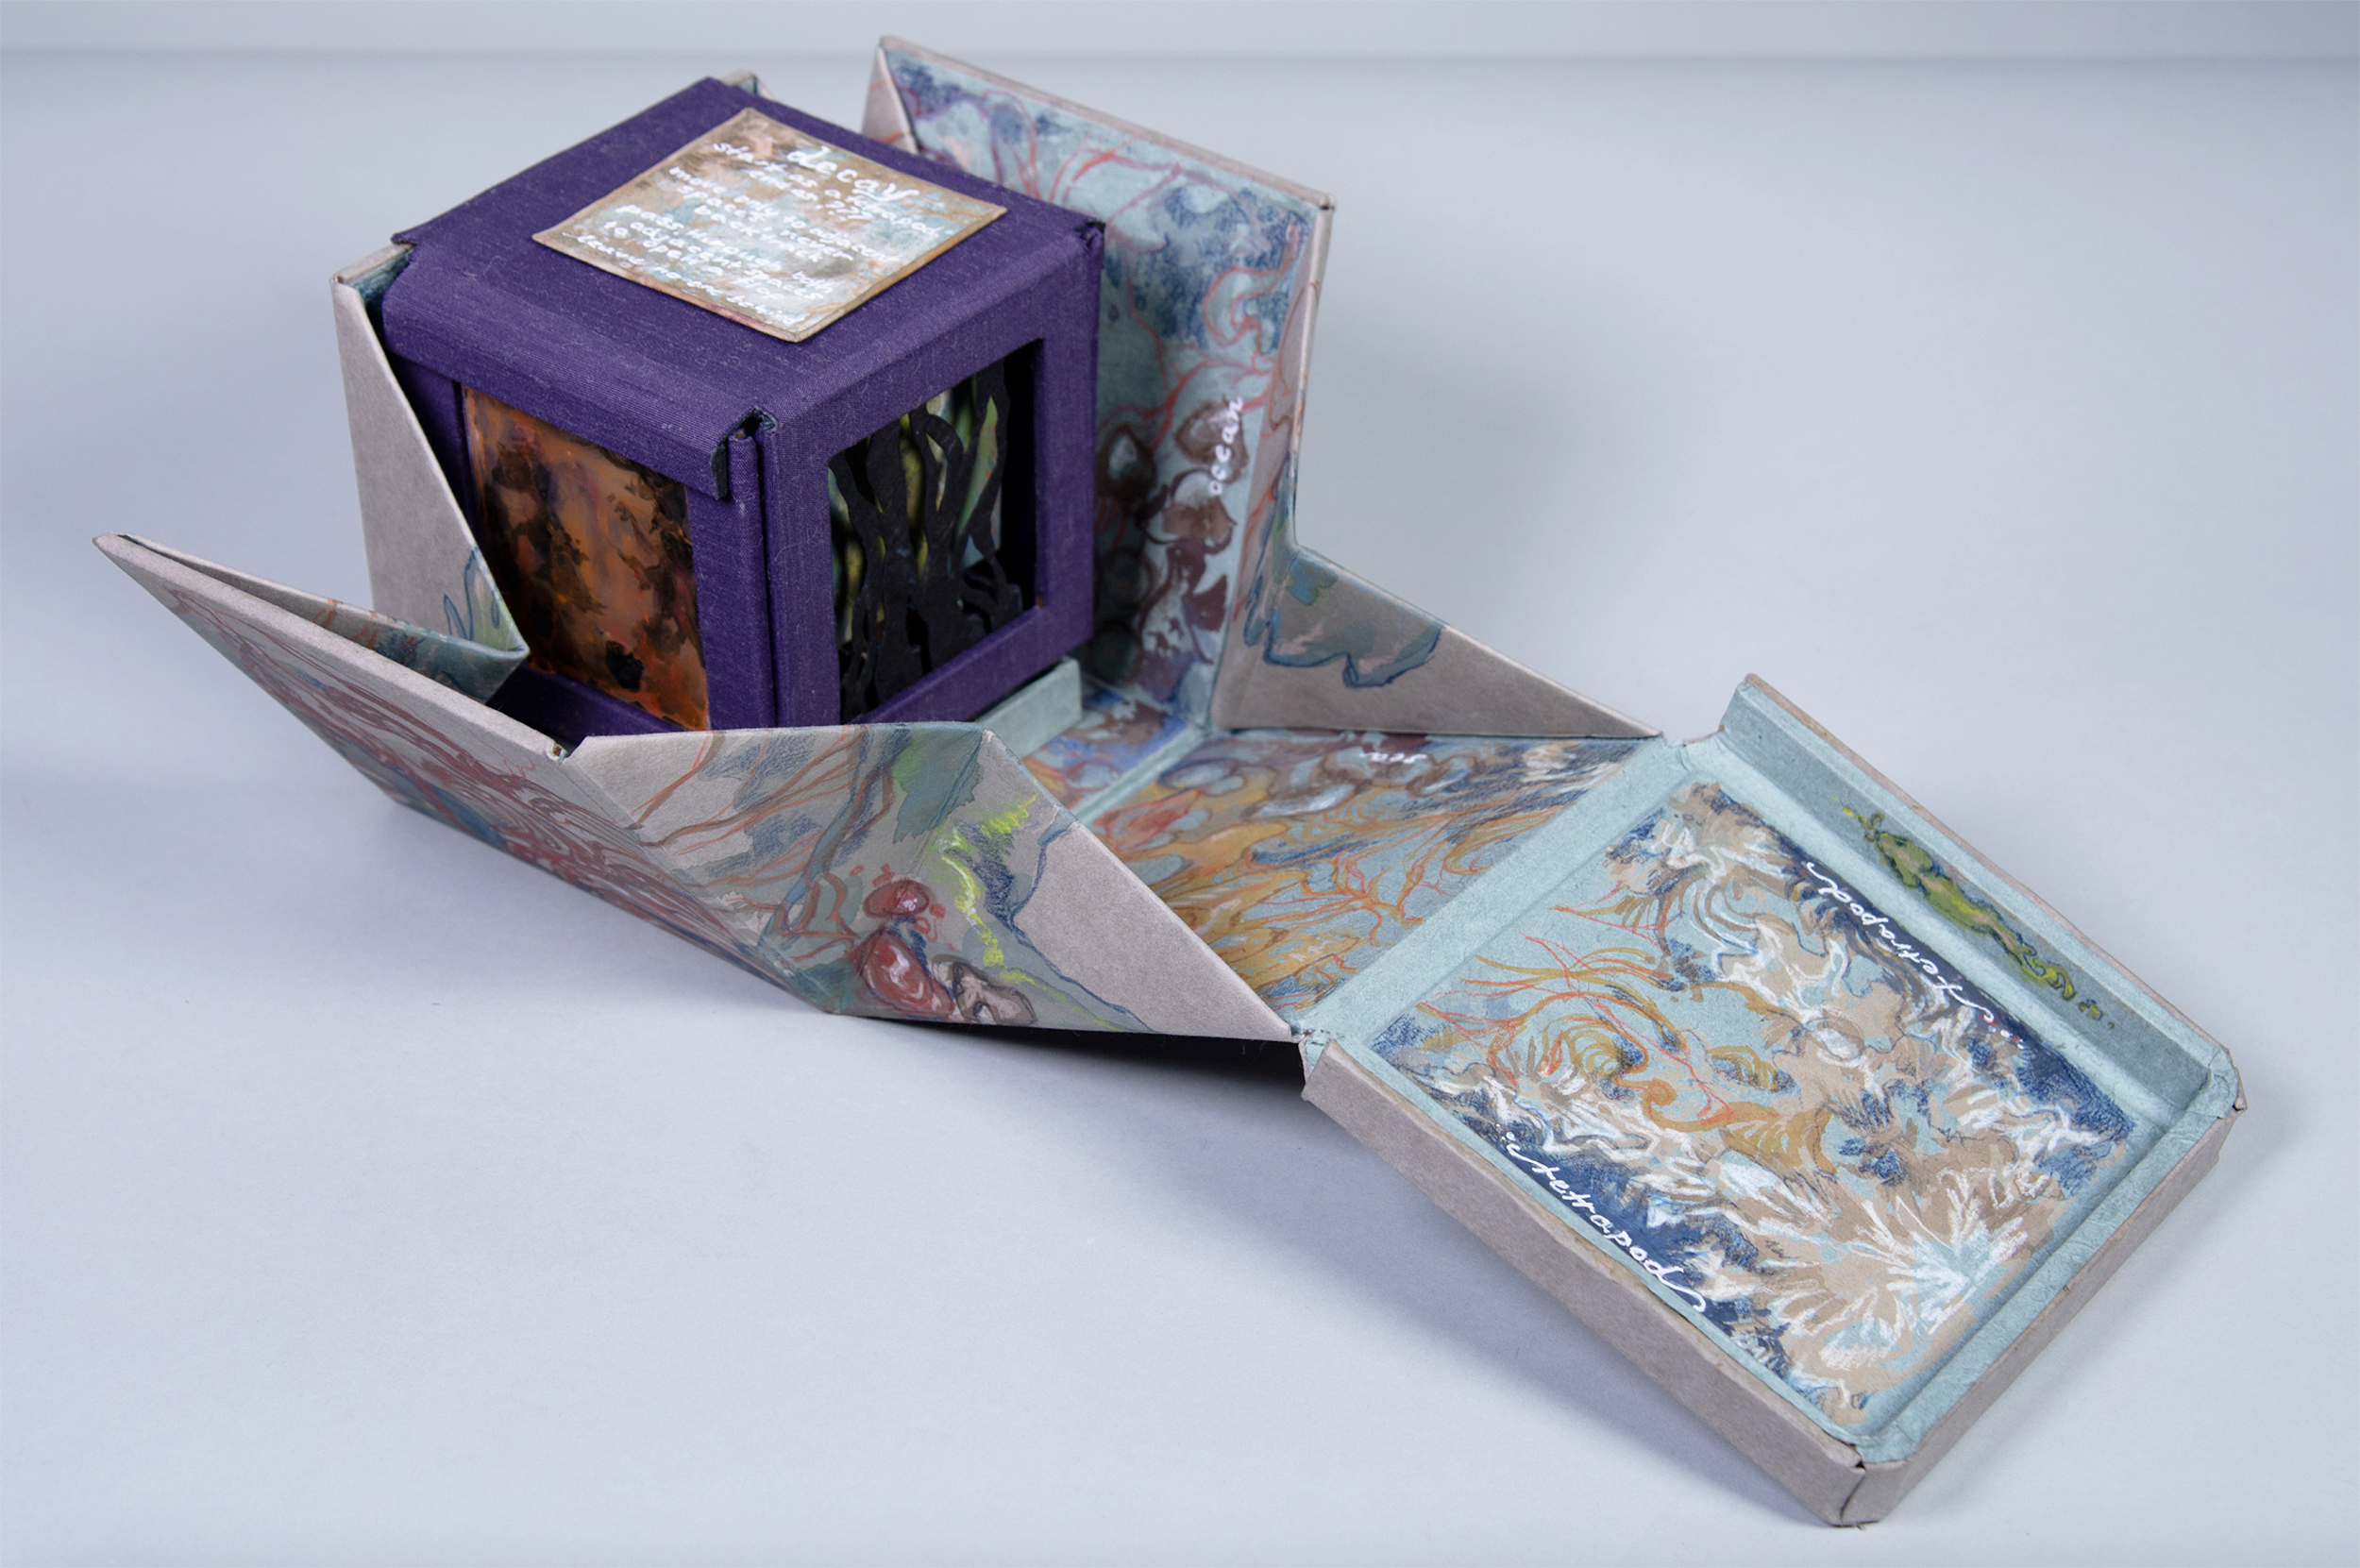 artist book / board game with hand-painted box